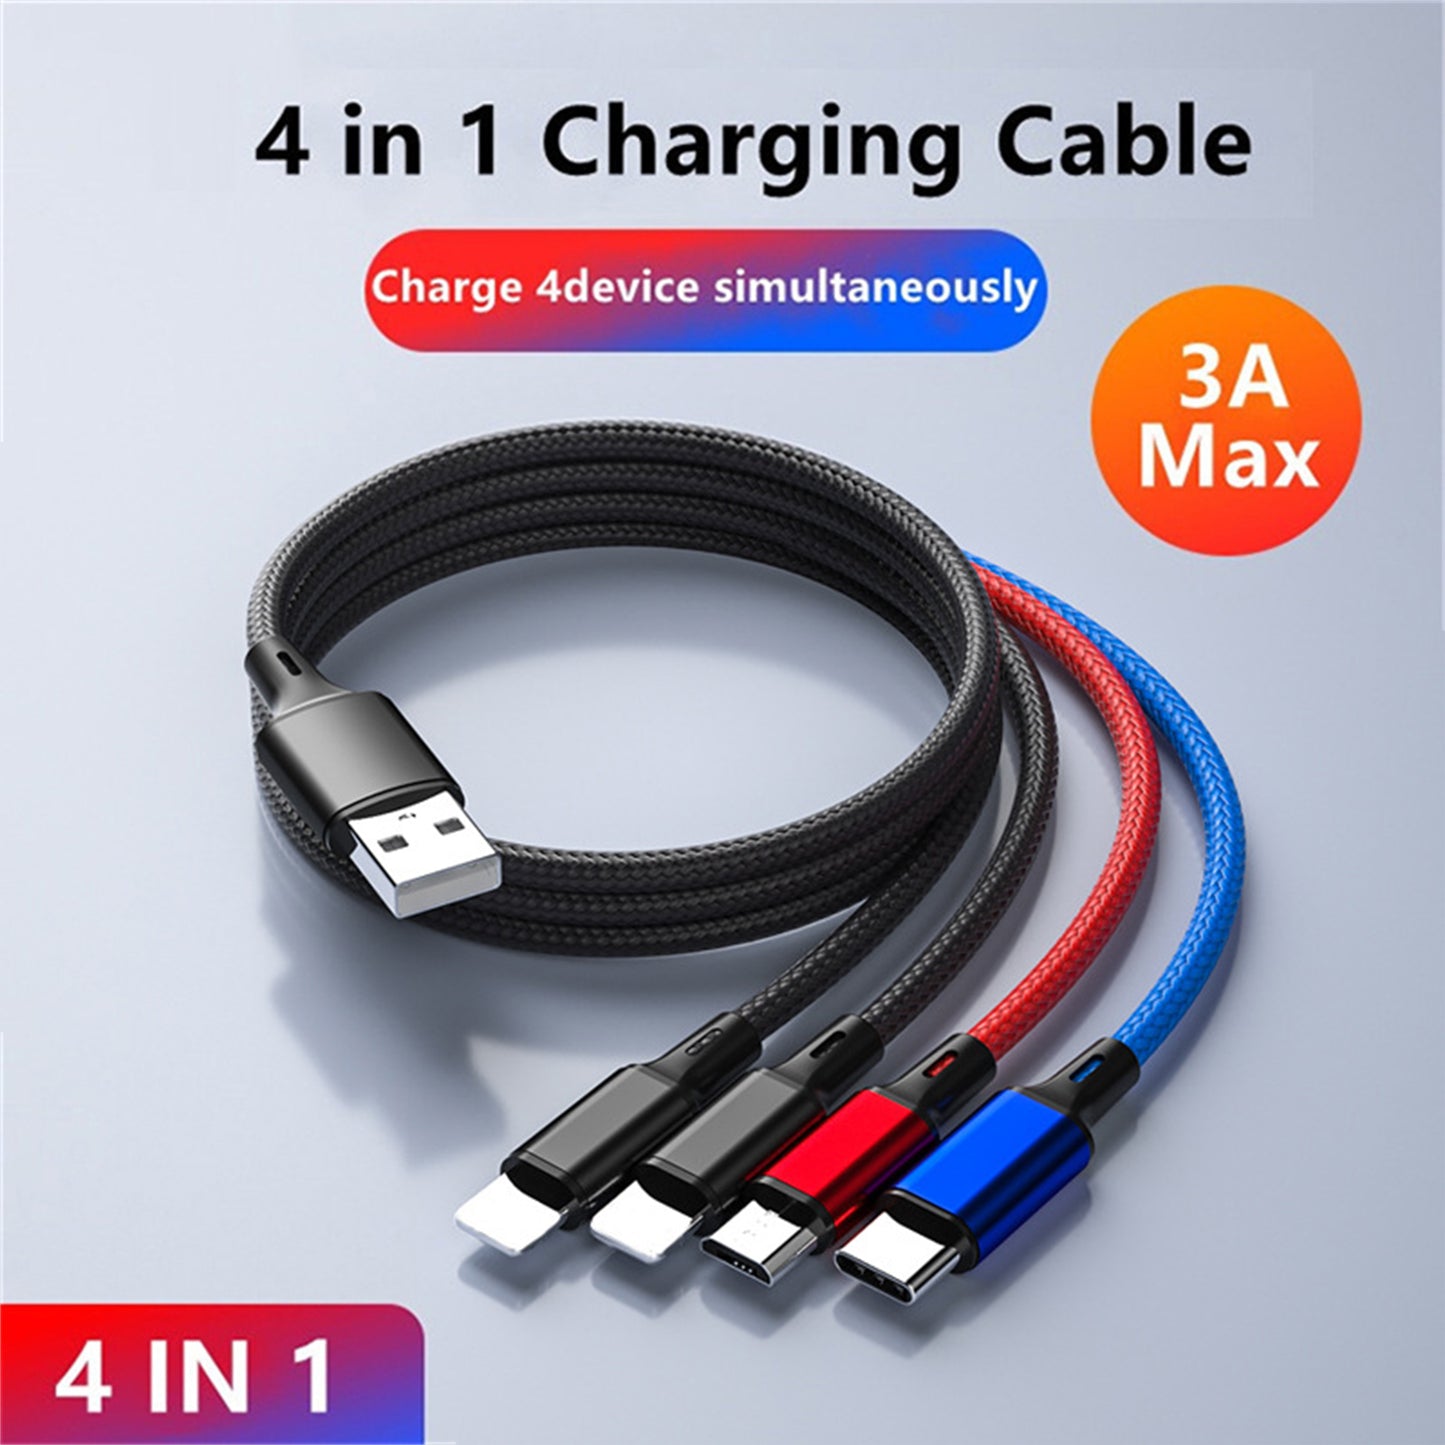 Mobax Nylon Woven 3A Super Fast Charging 4-in-1 USB Charger Charging Cable Huawei